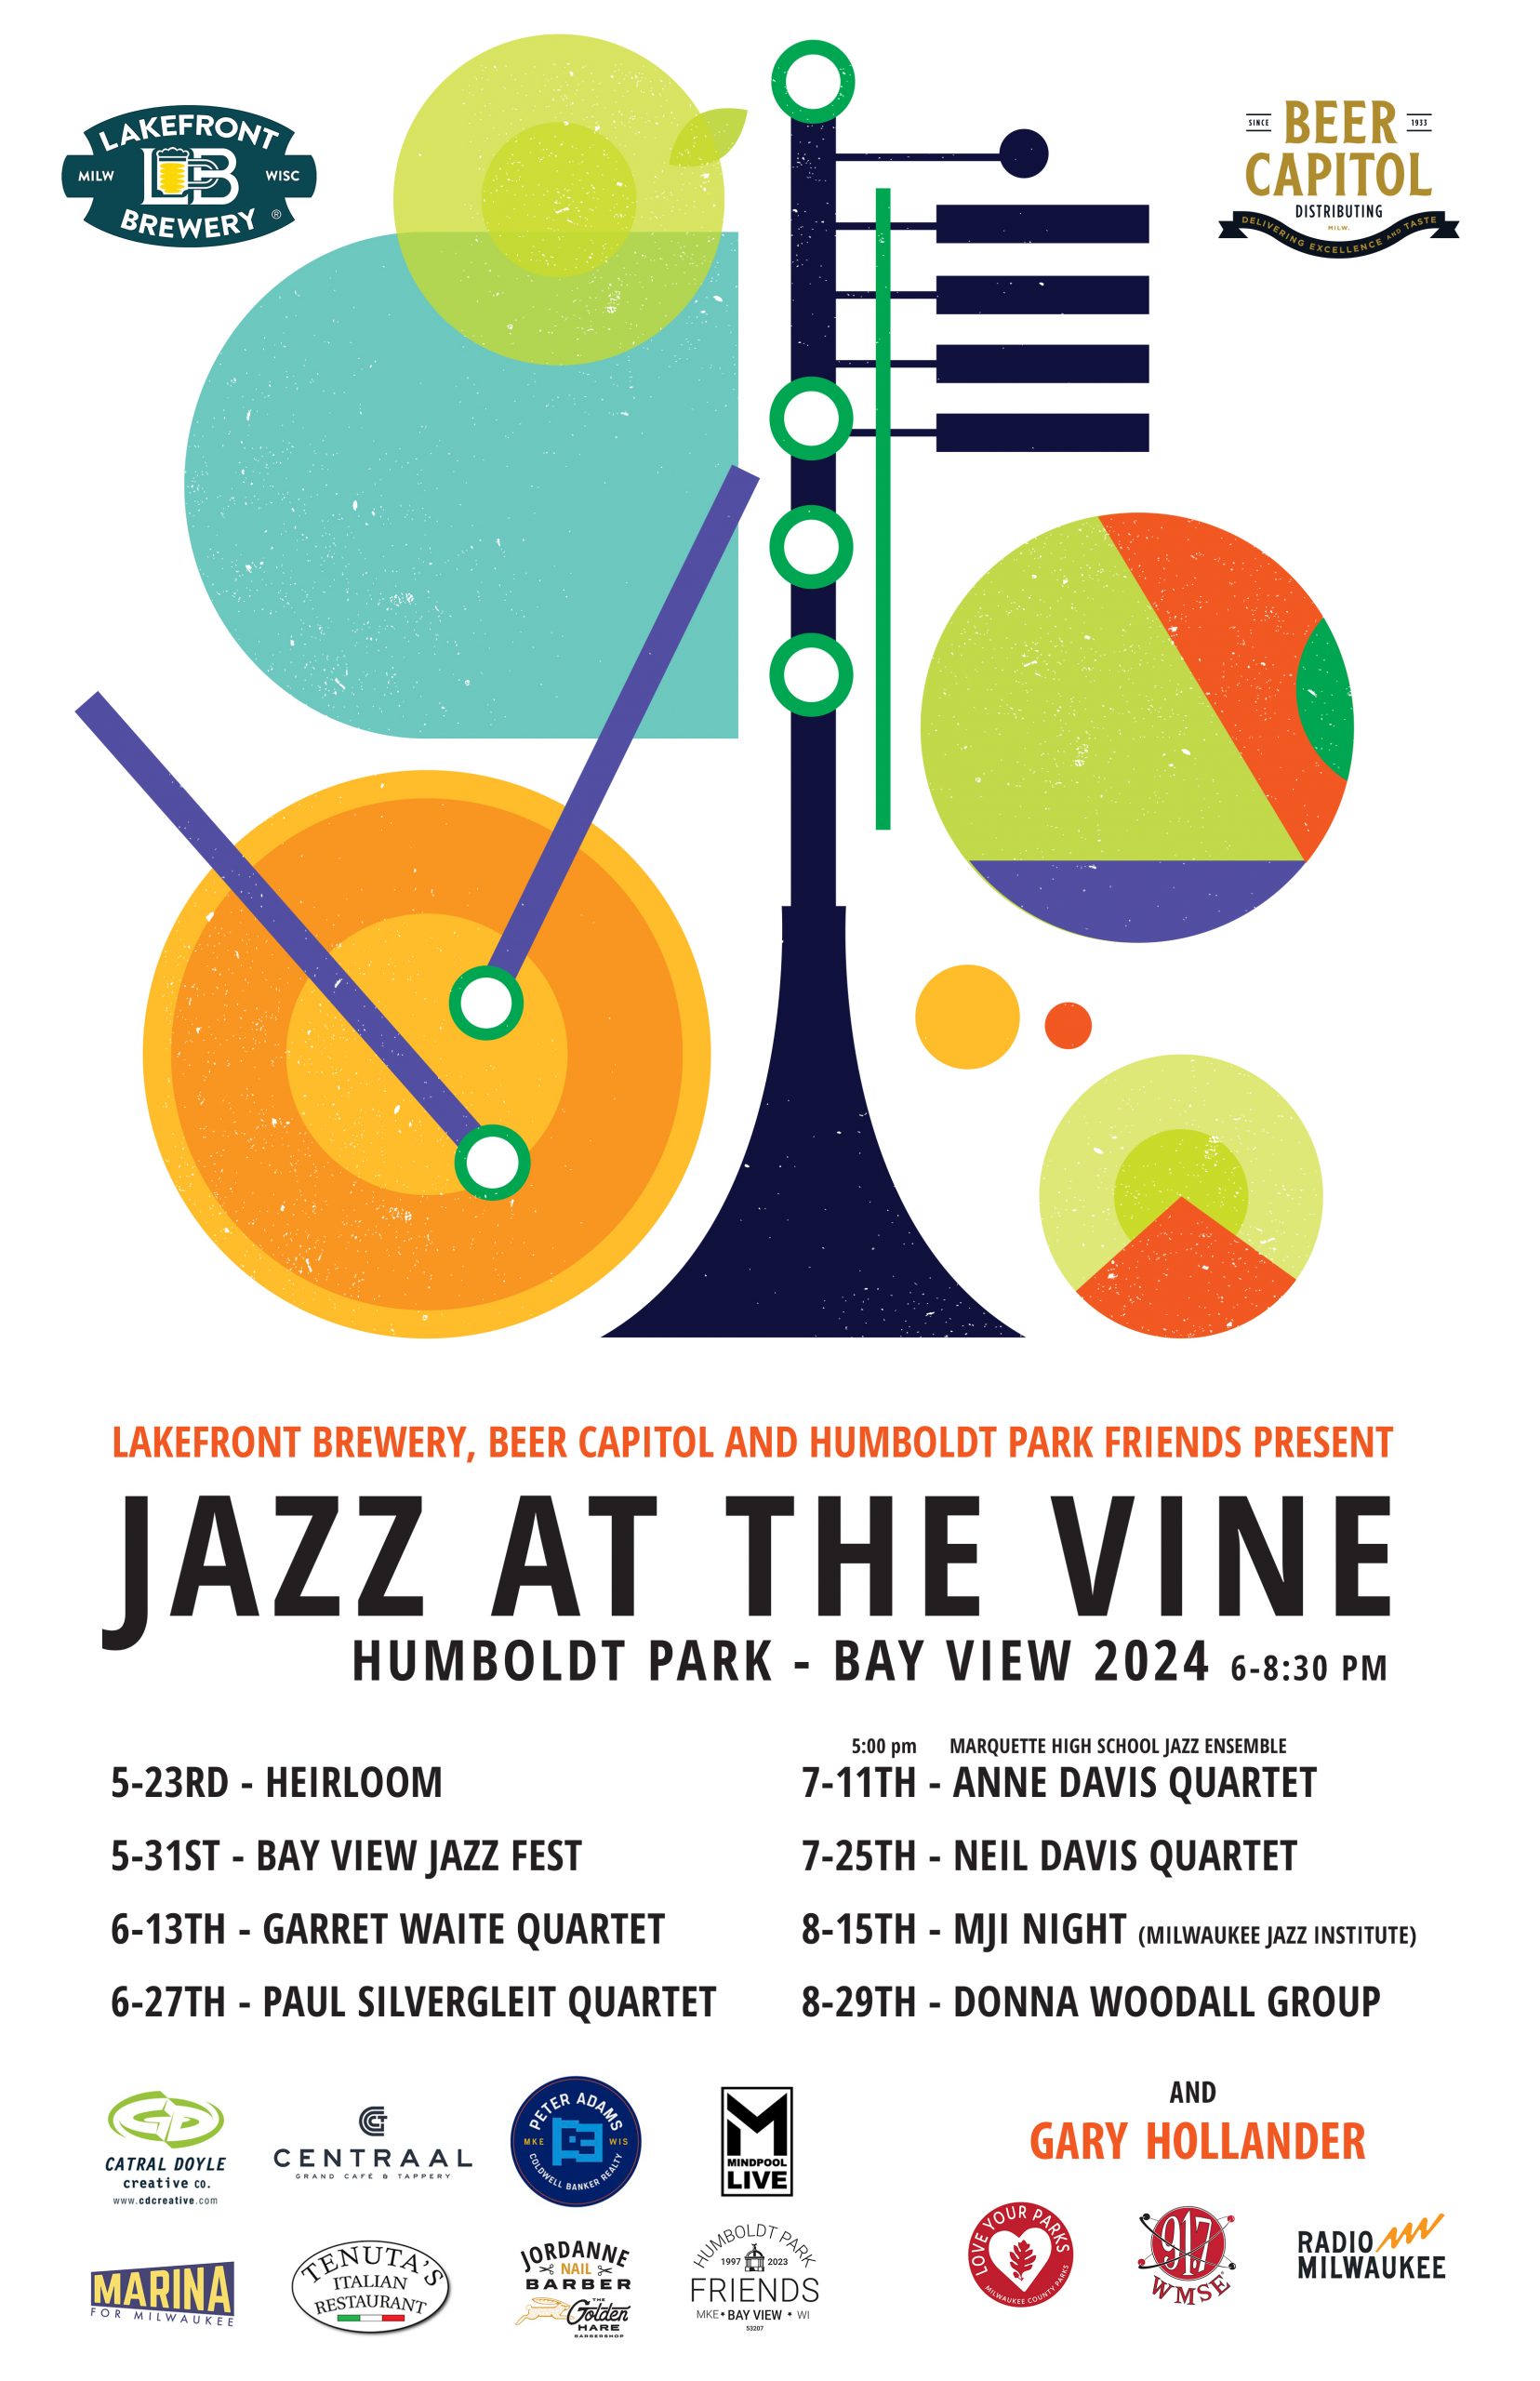 Jazz At The Vine Music Series Expands To 8 Concerts This Summer Beginning May 23